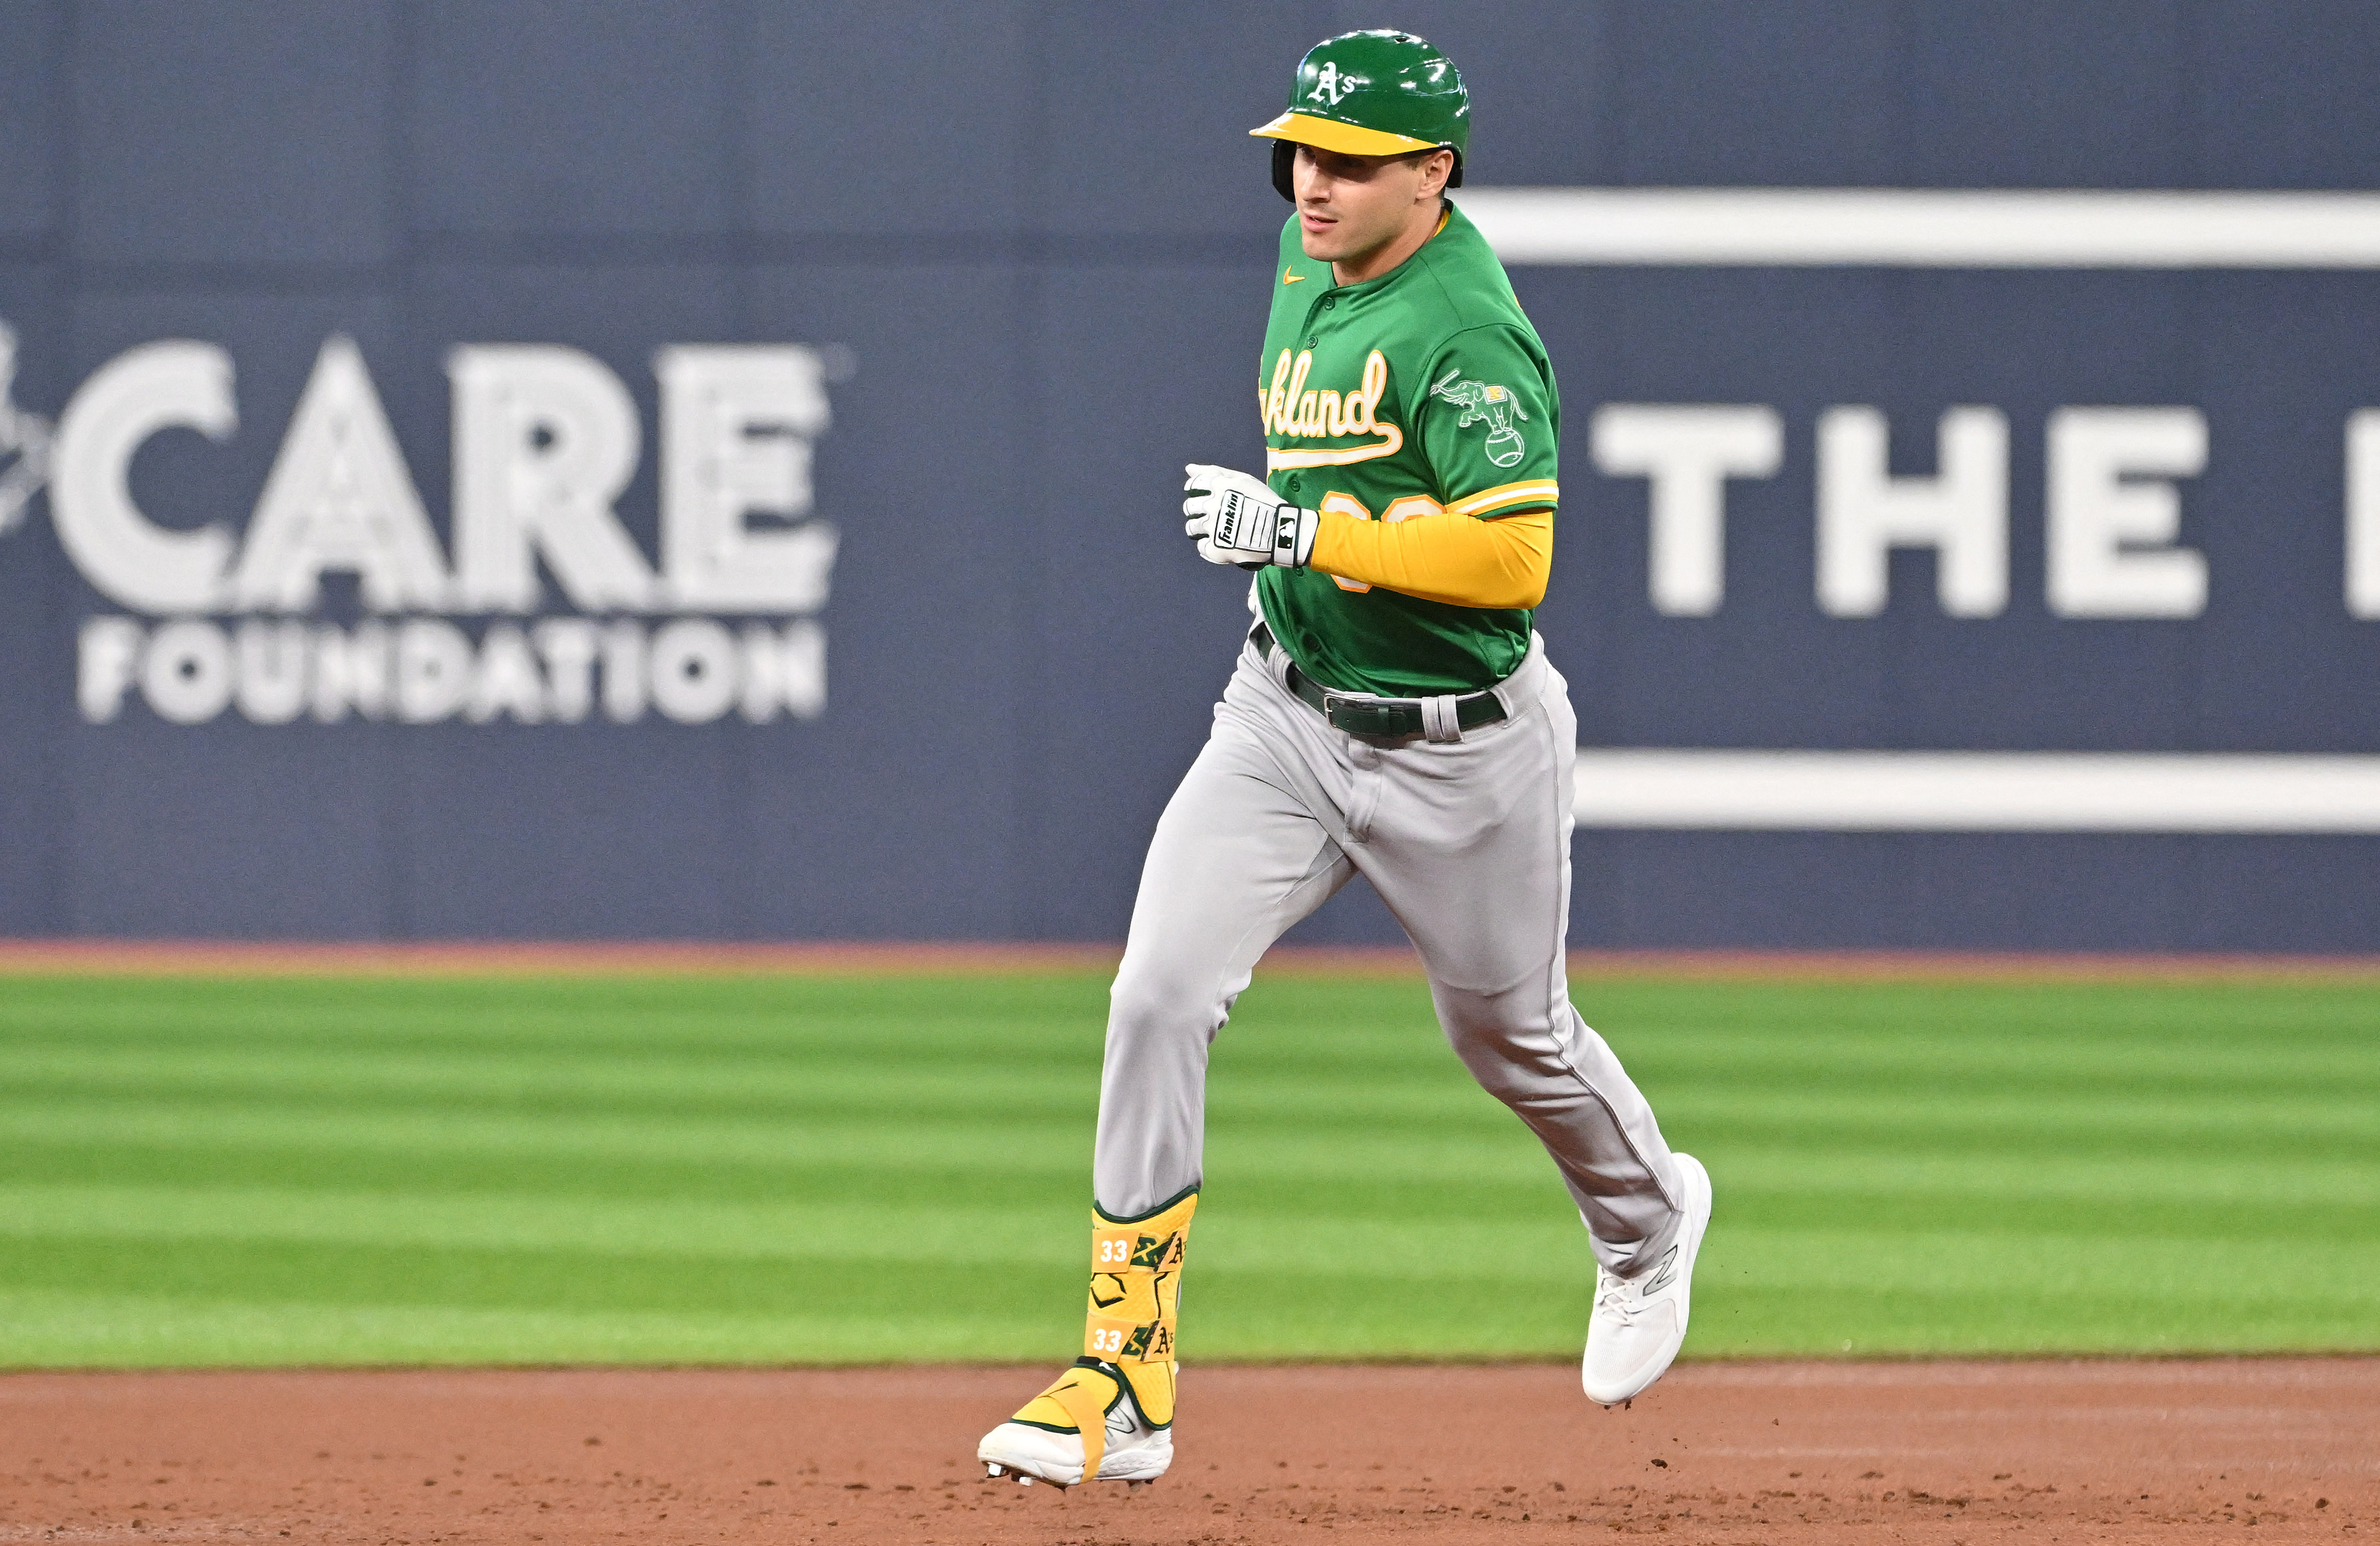 Shea Langeliers' game-winning HR in 9th helps A's end skid